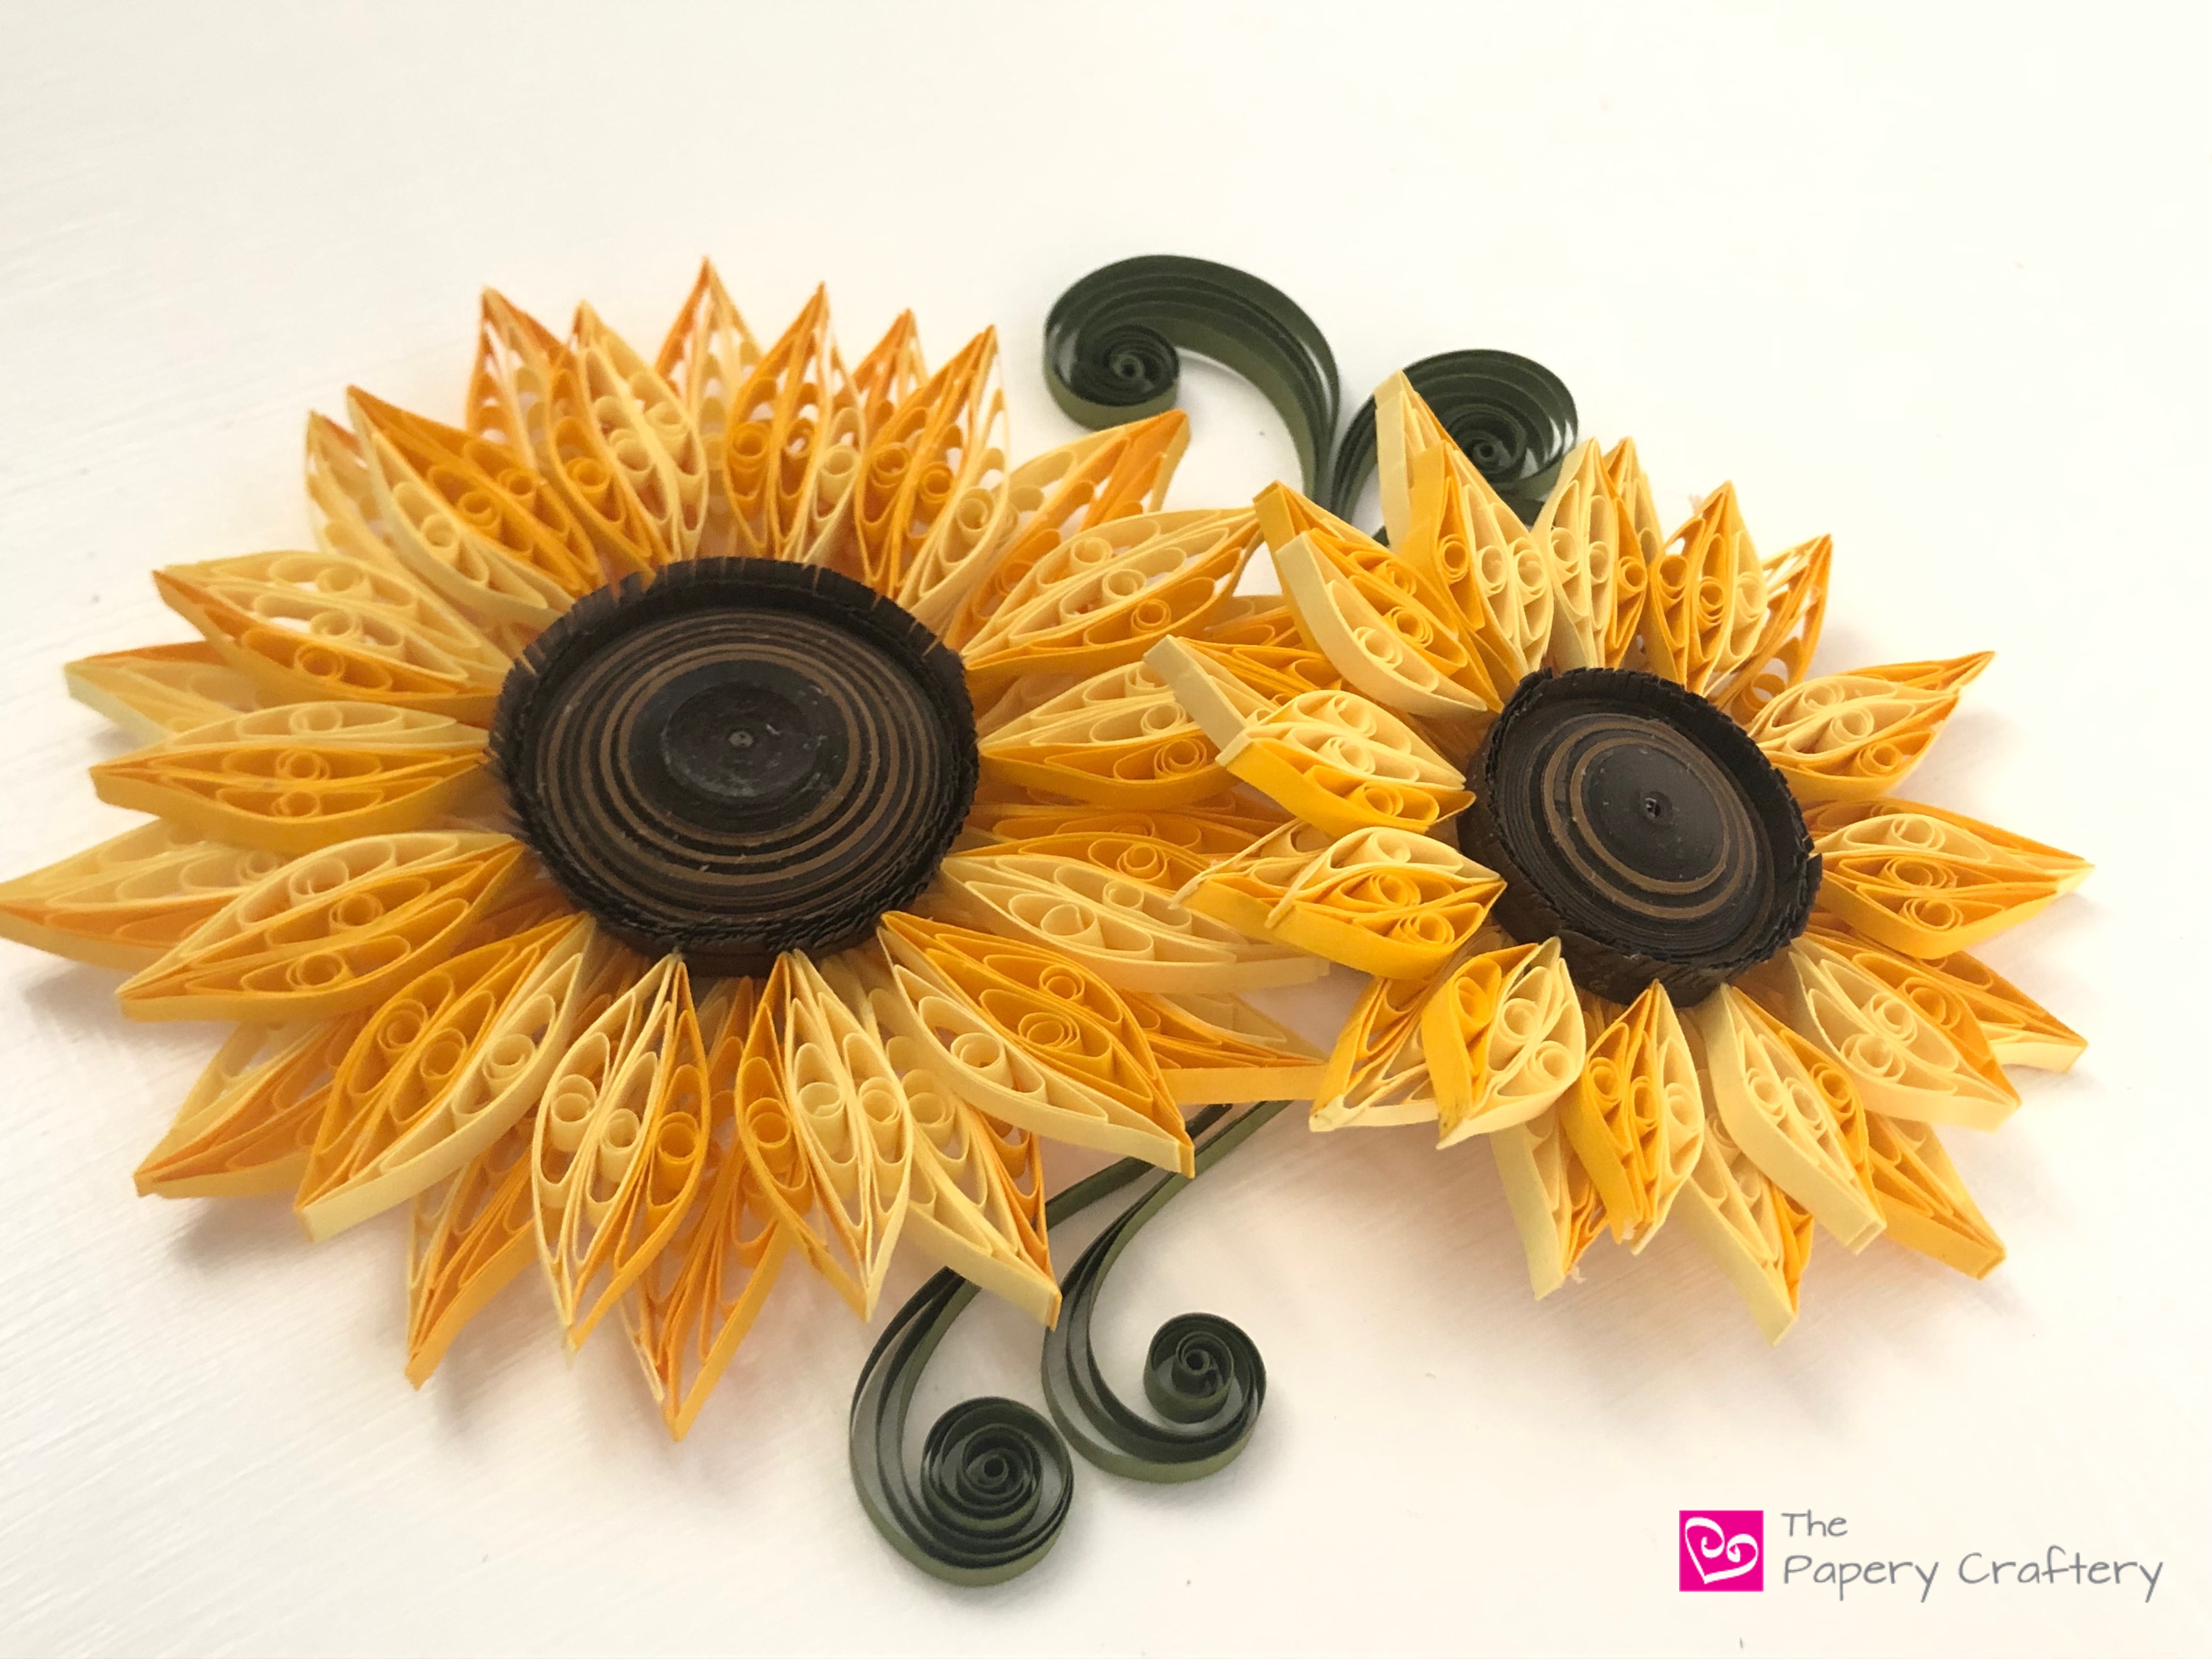 Free Quilling Templates - The Papery Craftery